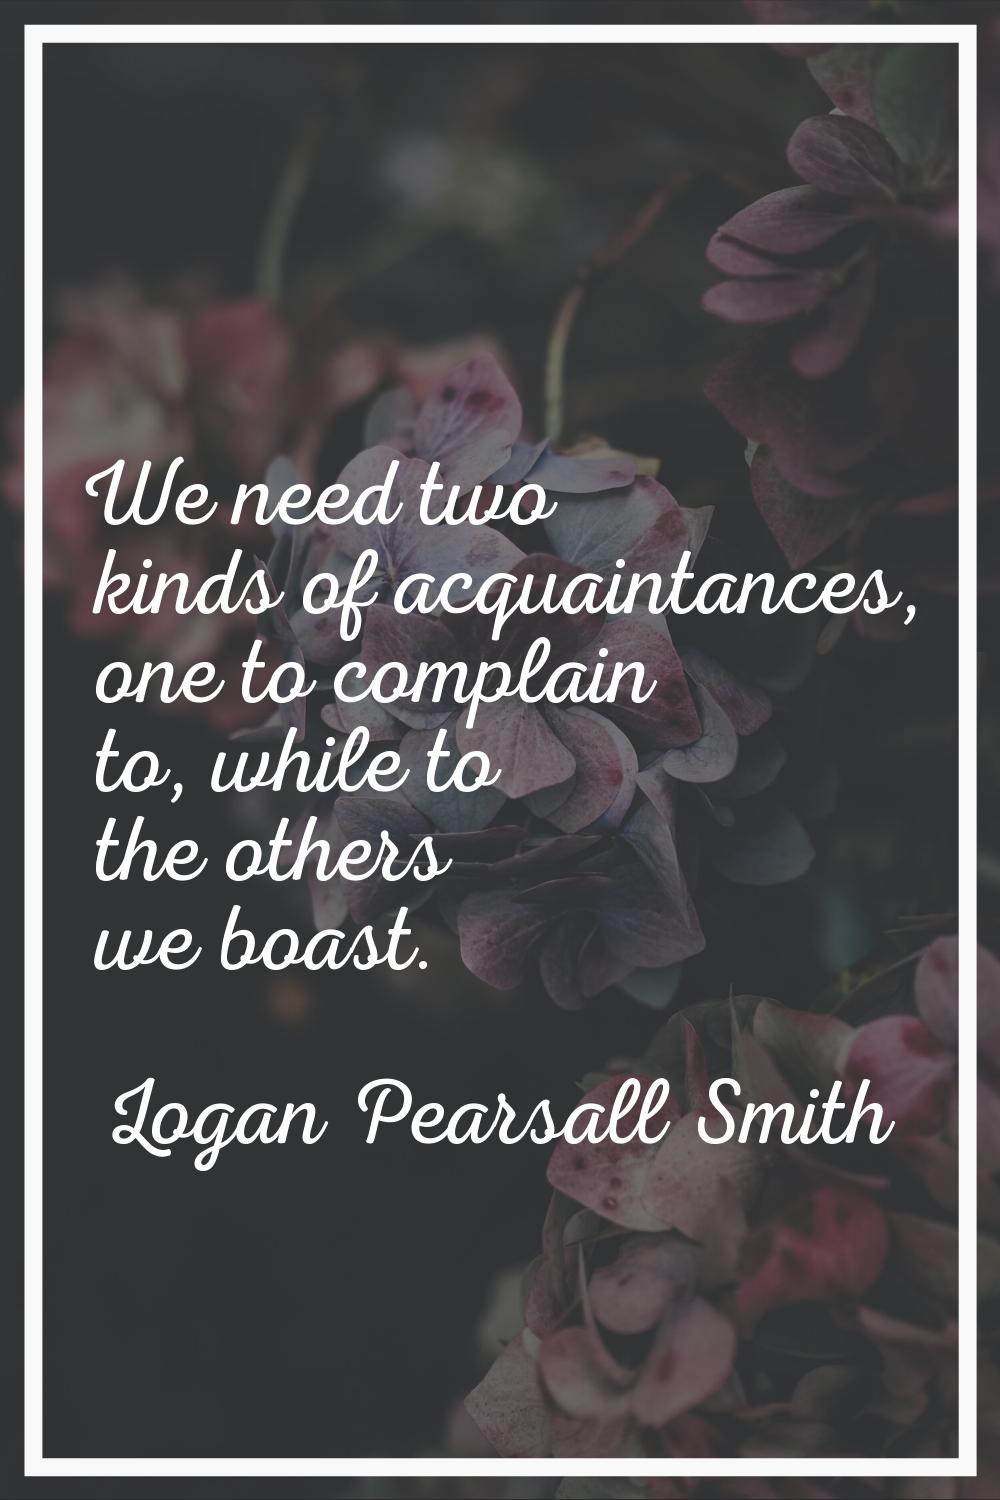 We need two kinds of acquaintances, one to complain to, while to the others we boast.